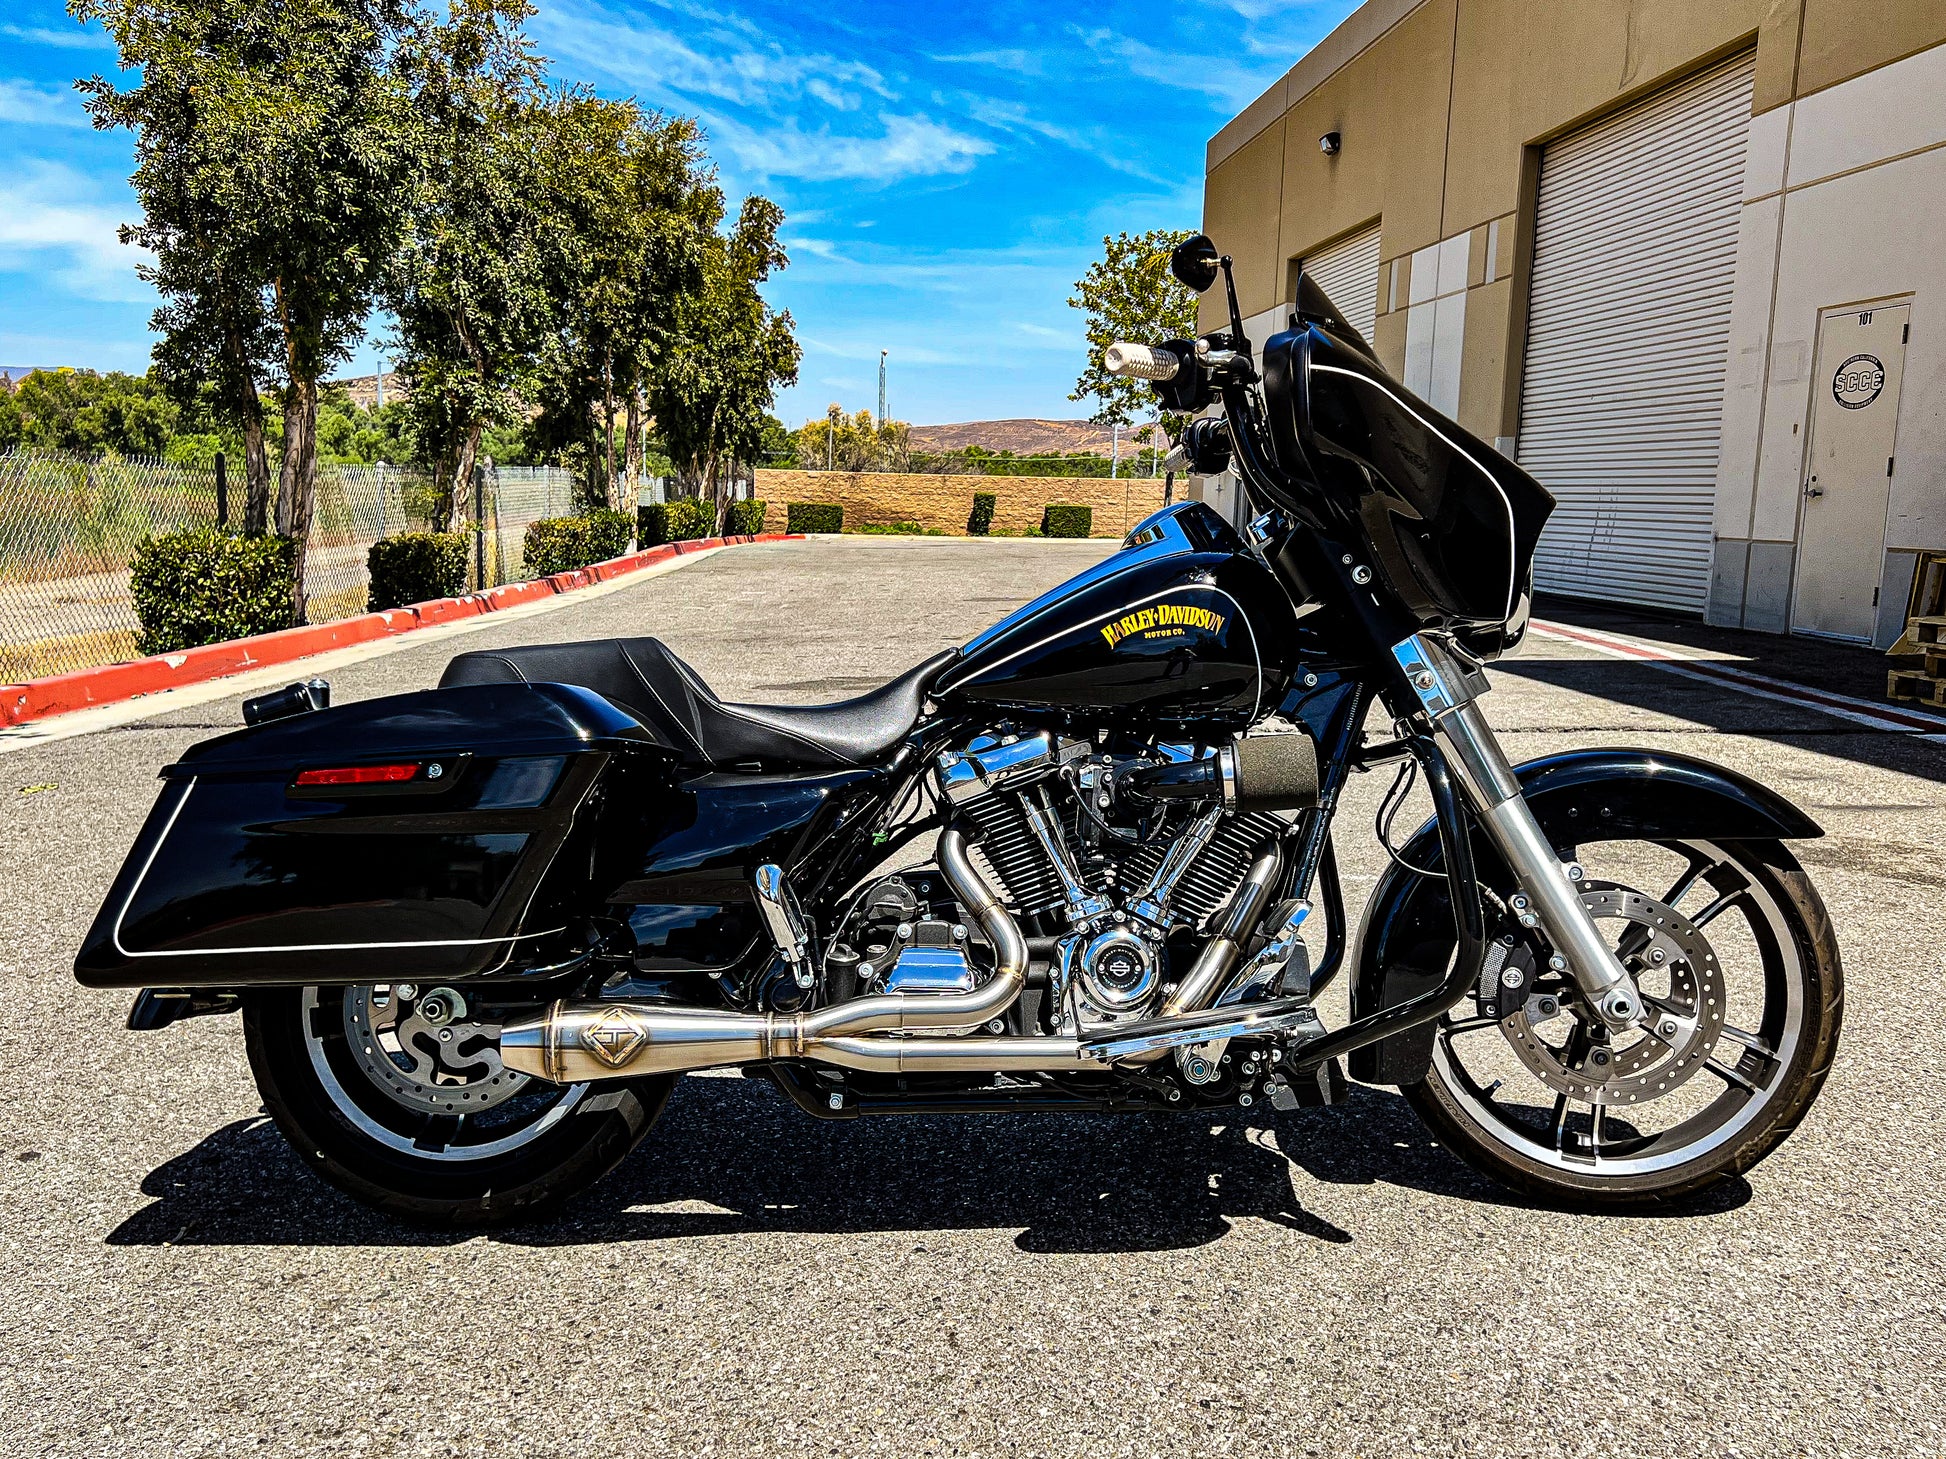 Stainless steel Lansplitter Exhaust on a Harley Davidson M8 Bagger Motorcycle